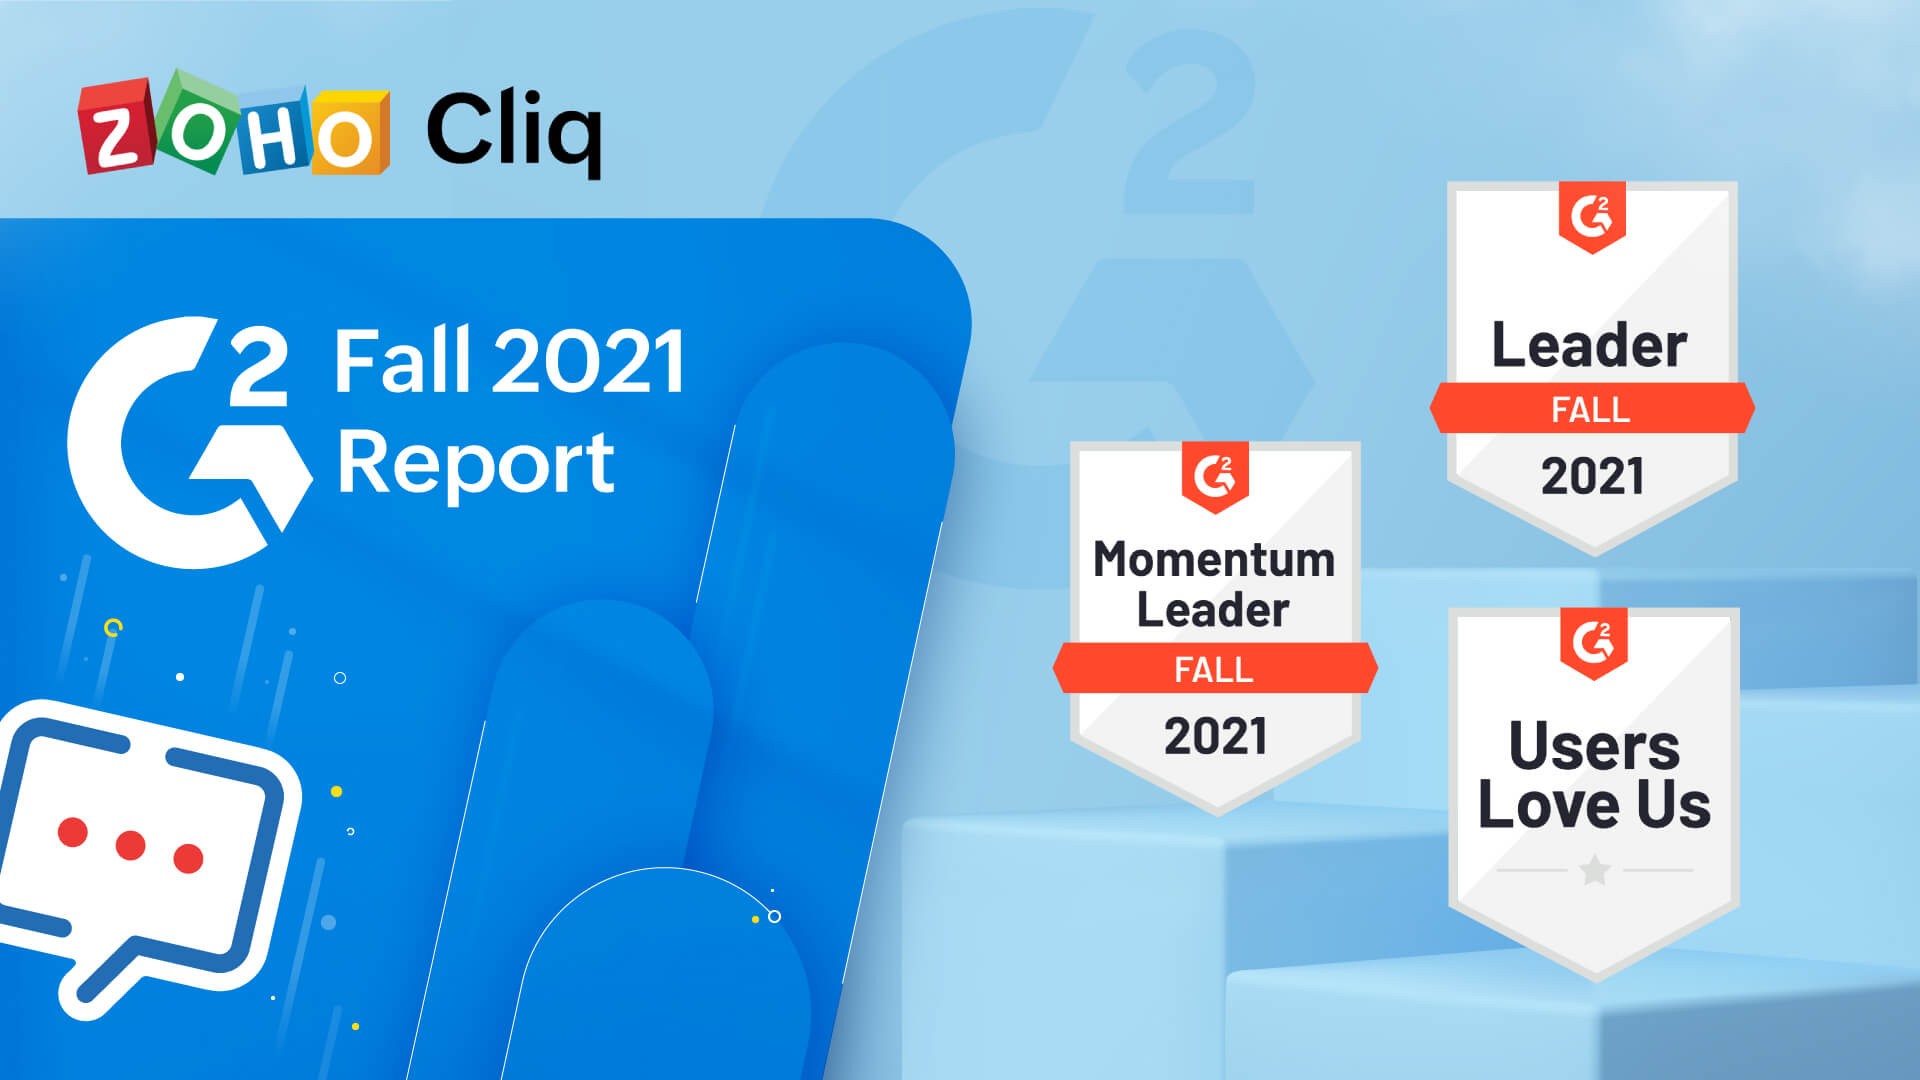 Zoho Cliq named a Leader in multiple G2 categories for fall 2021